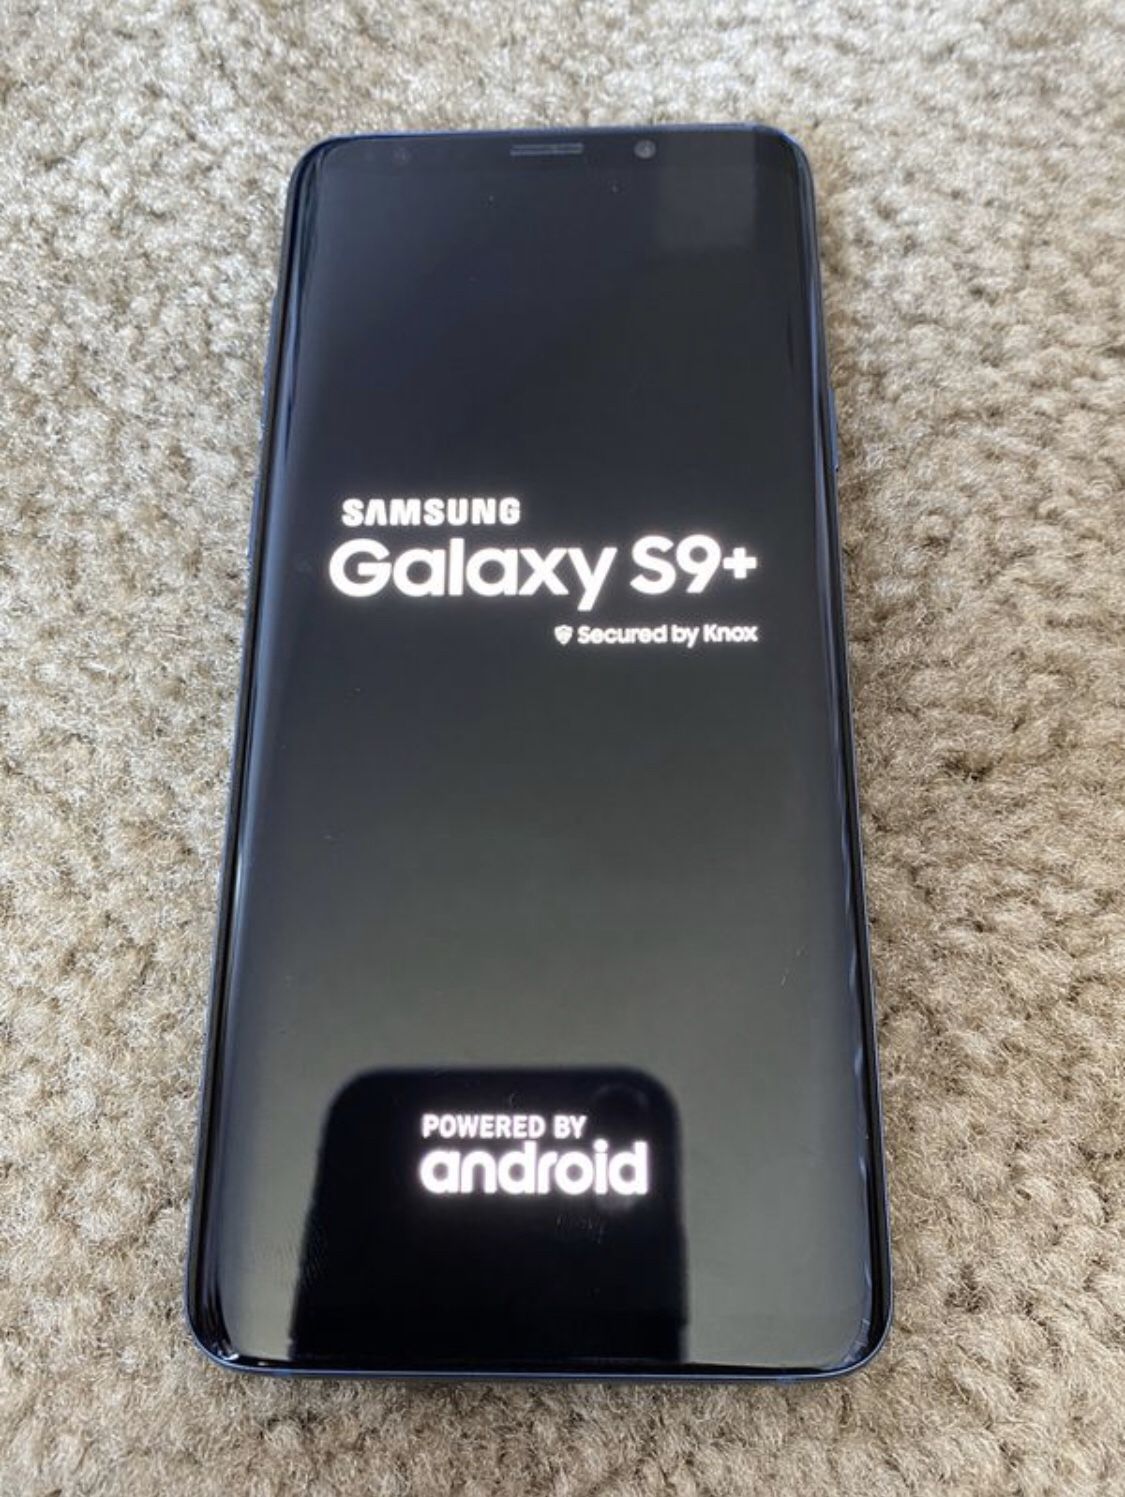 EXCELLENT CONDITION Samsung Galaxy S9+ PLUS 64GB (T-Mobile) UNLOCKED +USB CABLE +CHARGER $330 FIRM